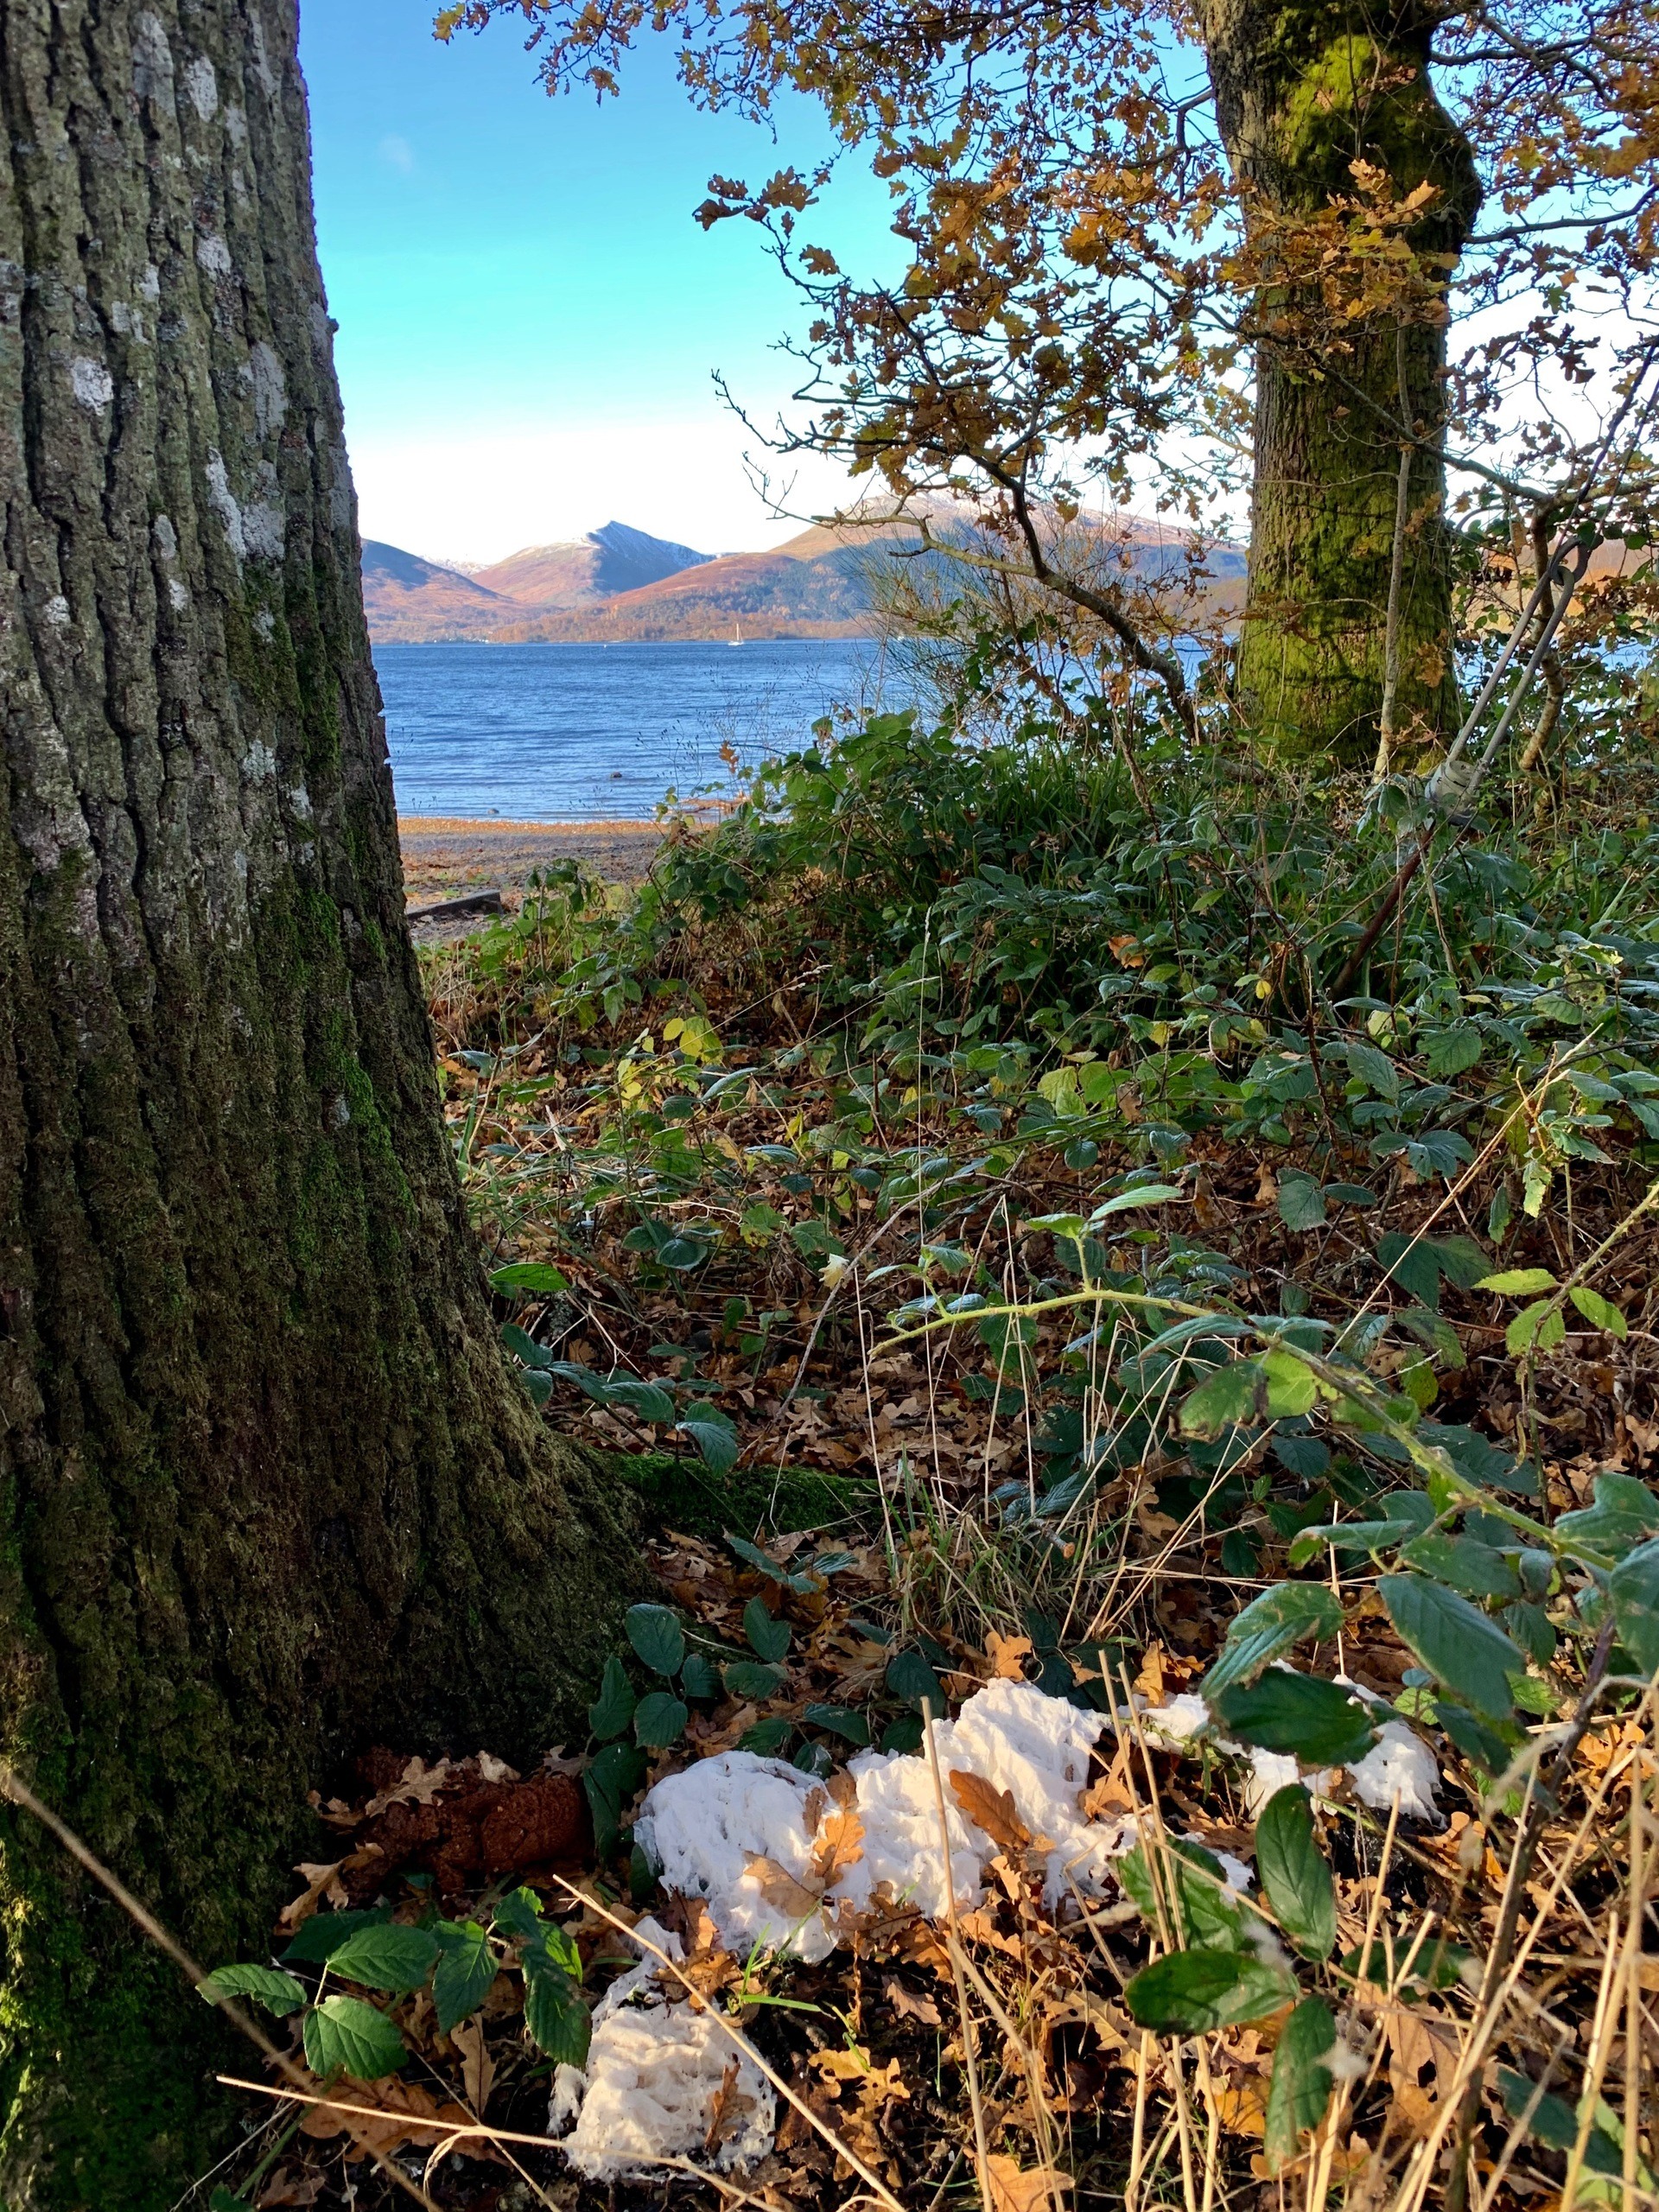 Loch Lomond and The Trossachs National Park authorities issued the plea and shared a beautiful image from the bonnie banks - but with an unwelcome addition in the foreground.